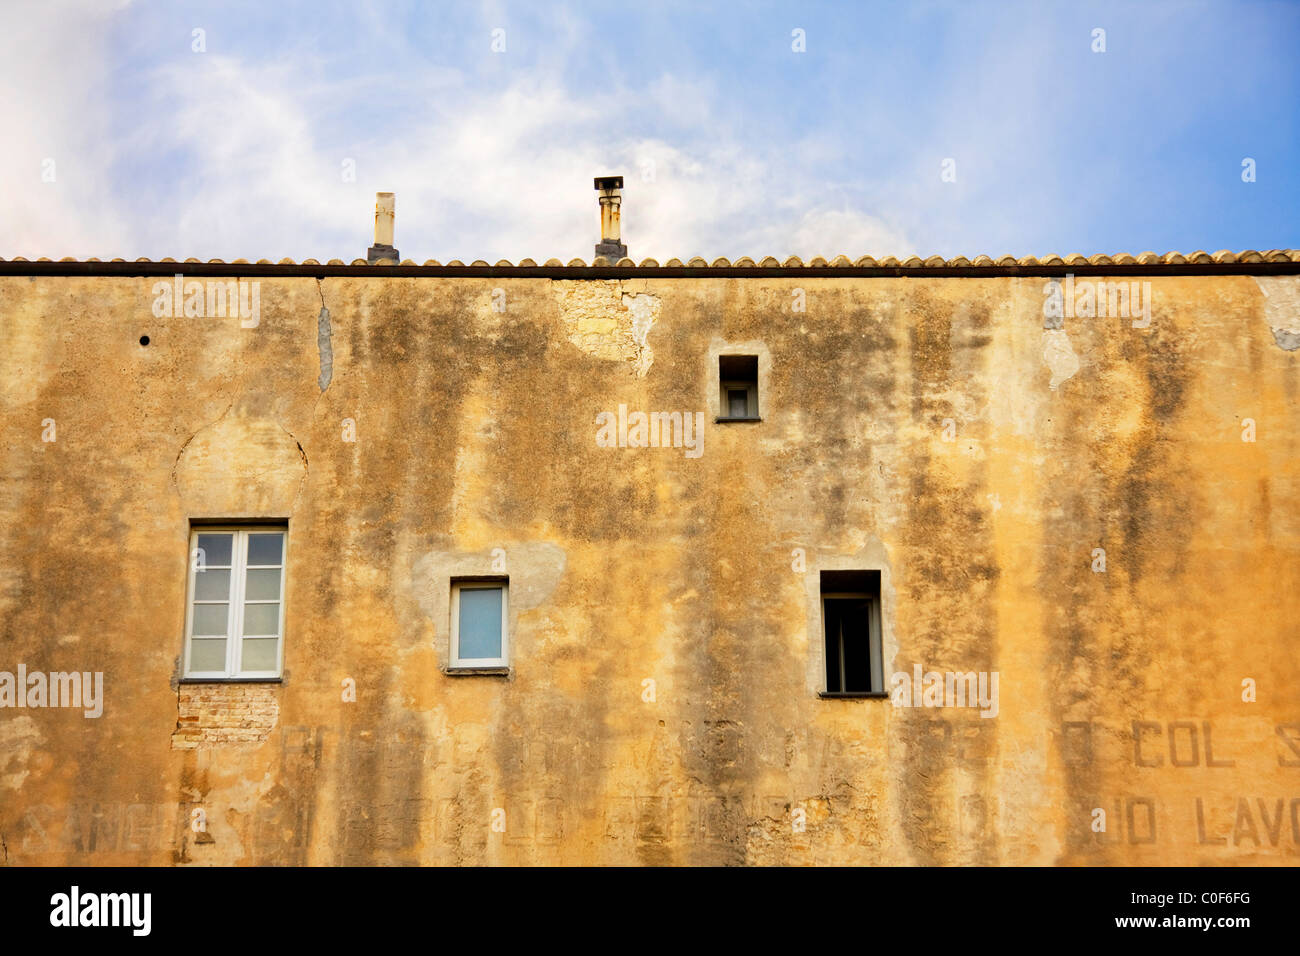 Windows on a yellow building with two chimneys in a blue sky day of Cagliari, Sardinia Stock Photo